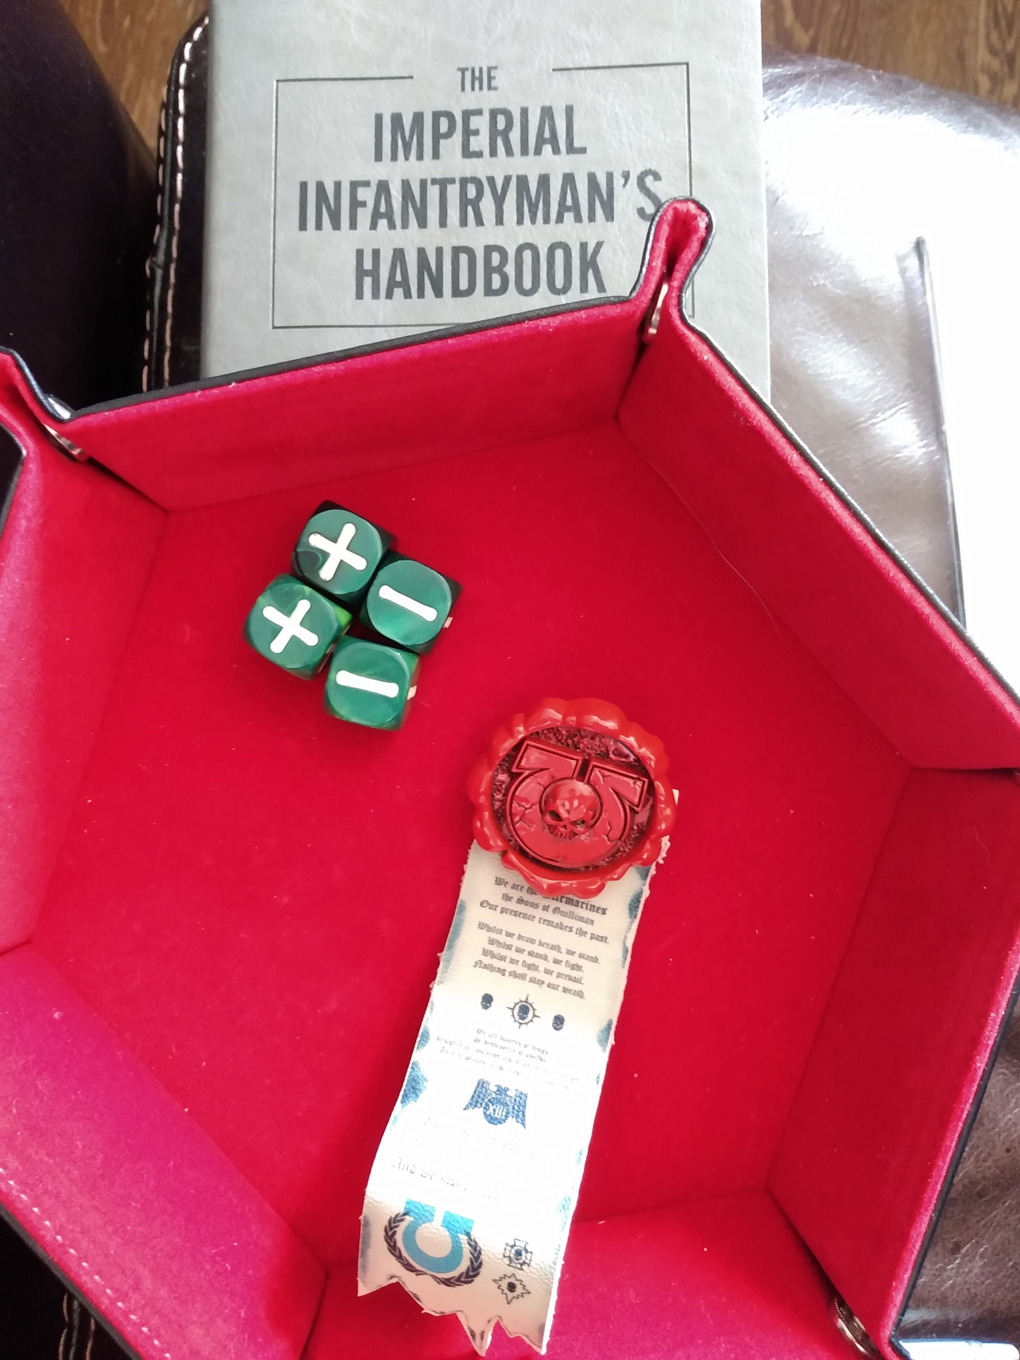 A red felt-lined dice tray holds four dice and a novelty purity seal from warhammer 40,000